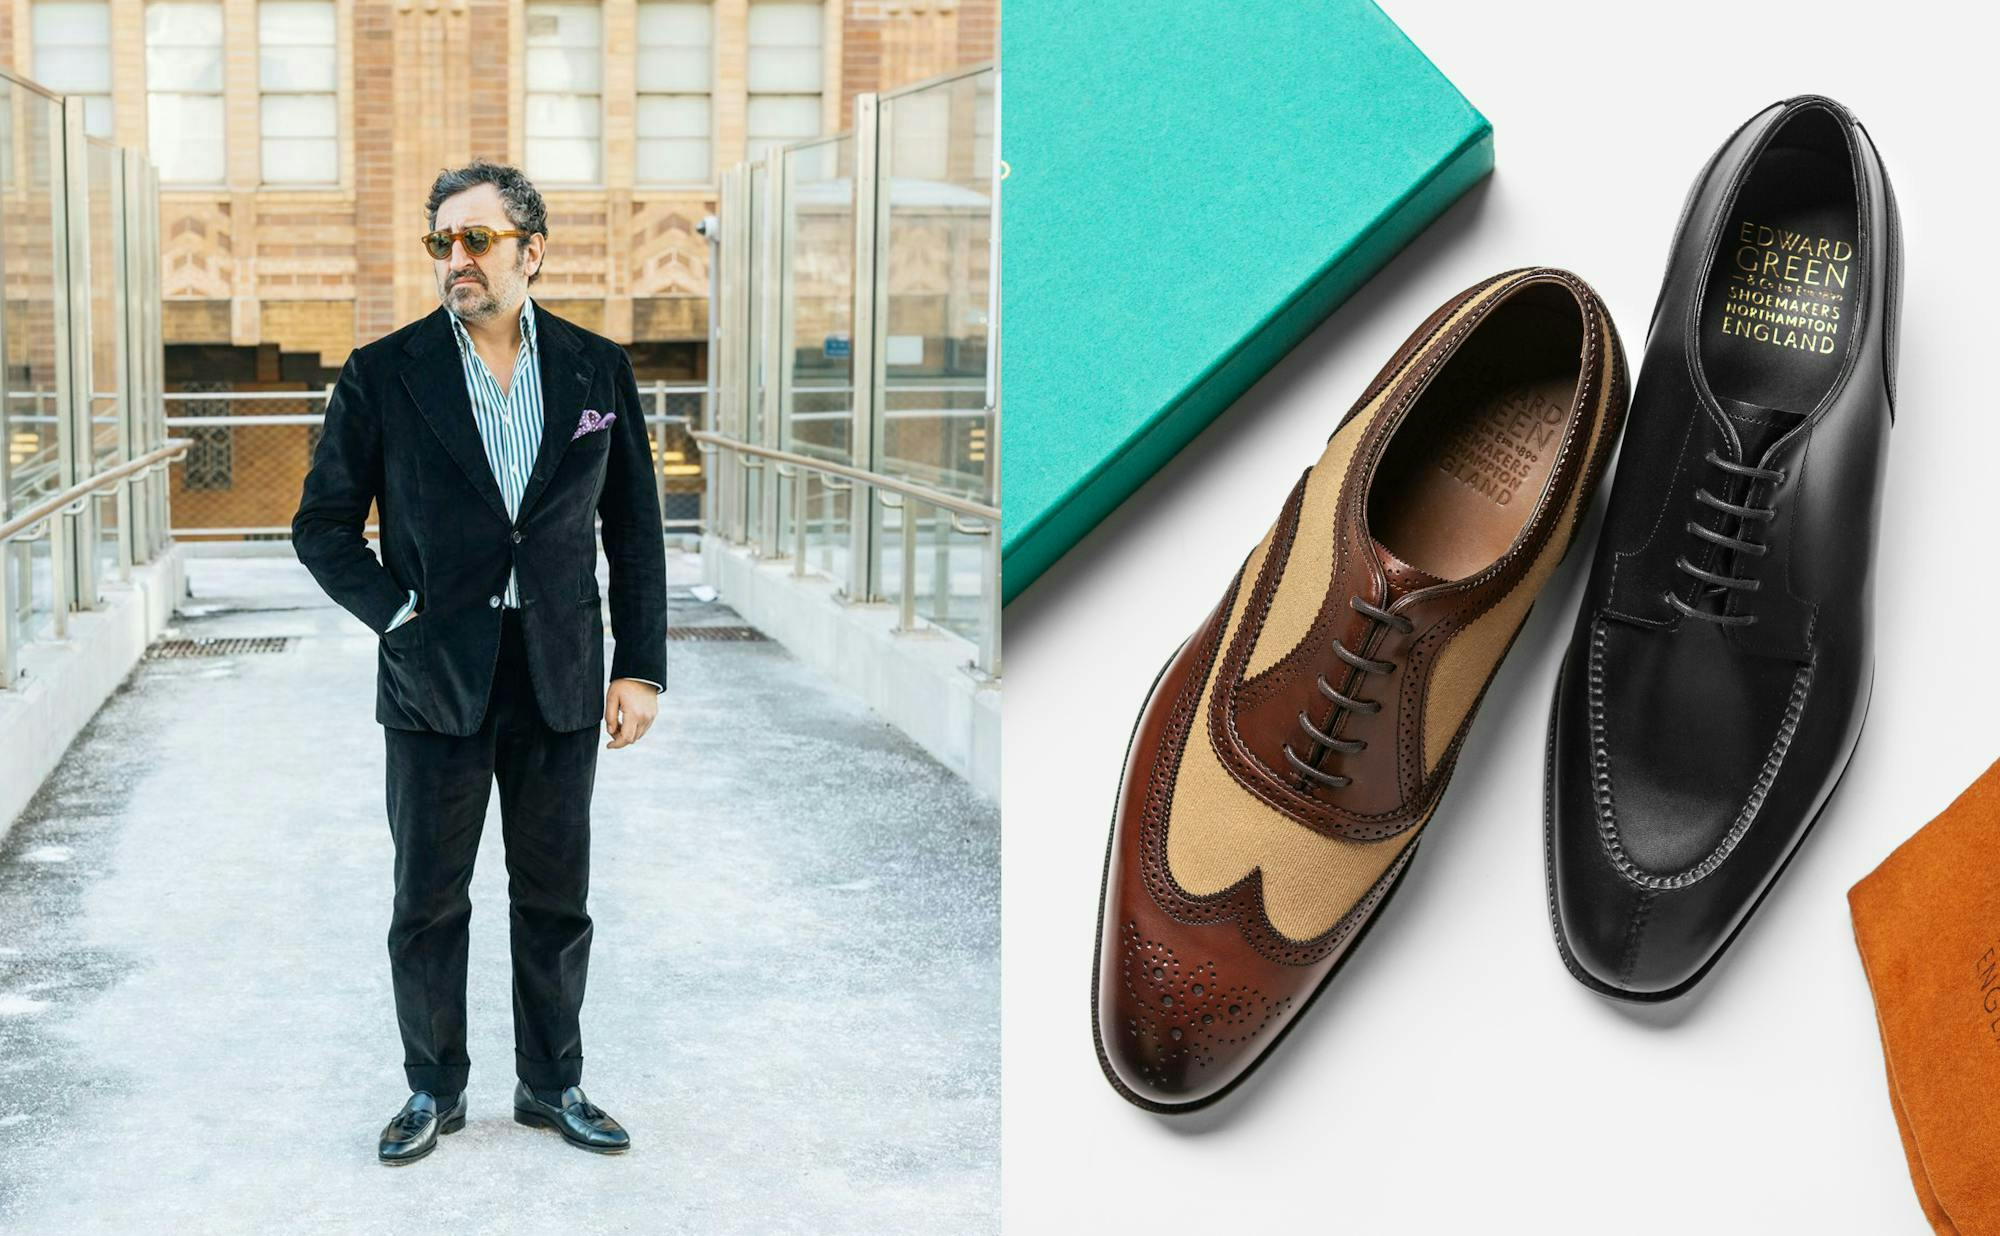 A diptych of two photos. In the first a man wears a black corduroy suit. In the second, there are two classic Edward Green shoes, one a derby, the other an oxford.